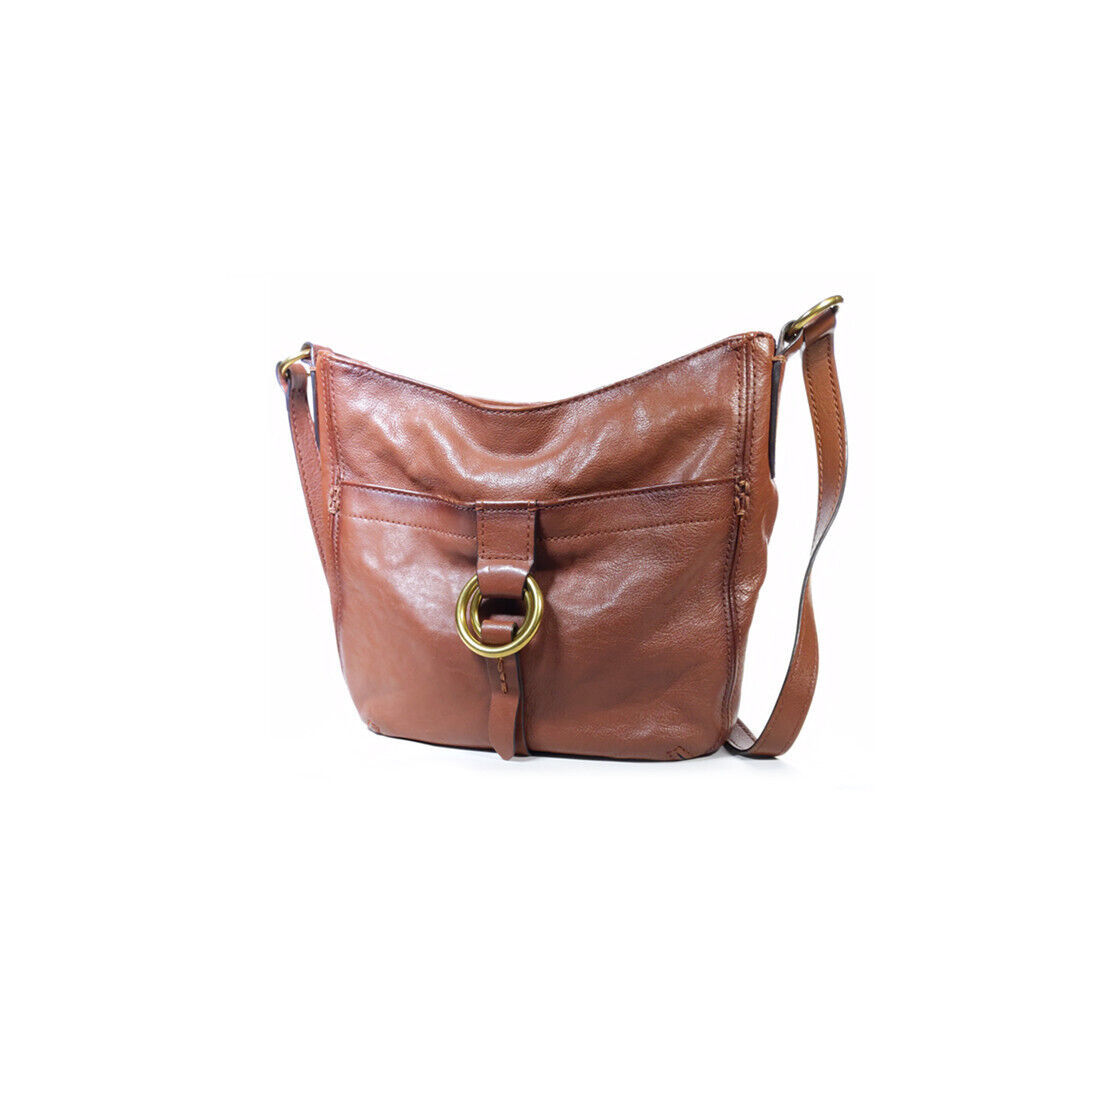 Primary image for FRYE Bag 'Modern Ring' Brown Cognac Leather Crossbody *EXCELLENT*